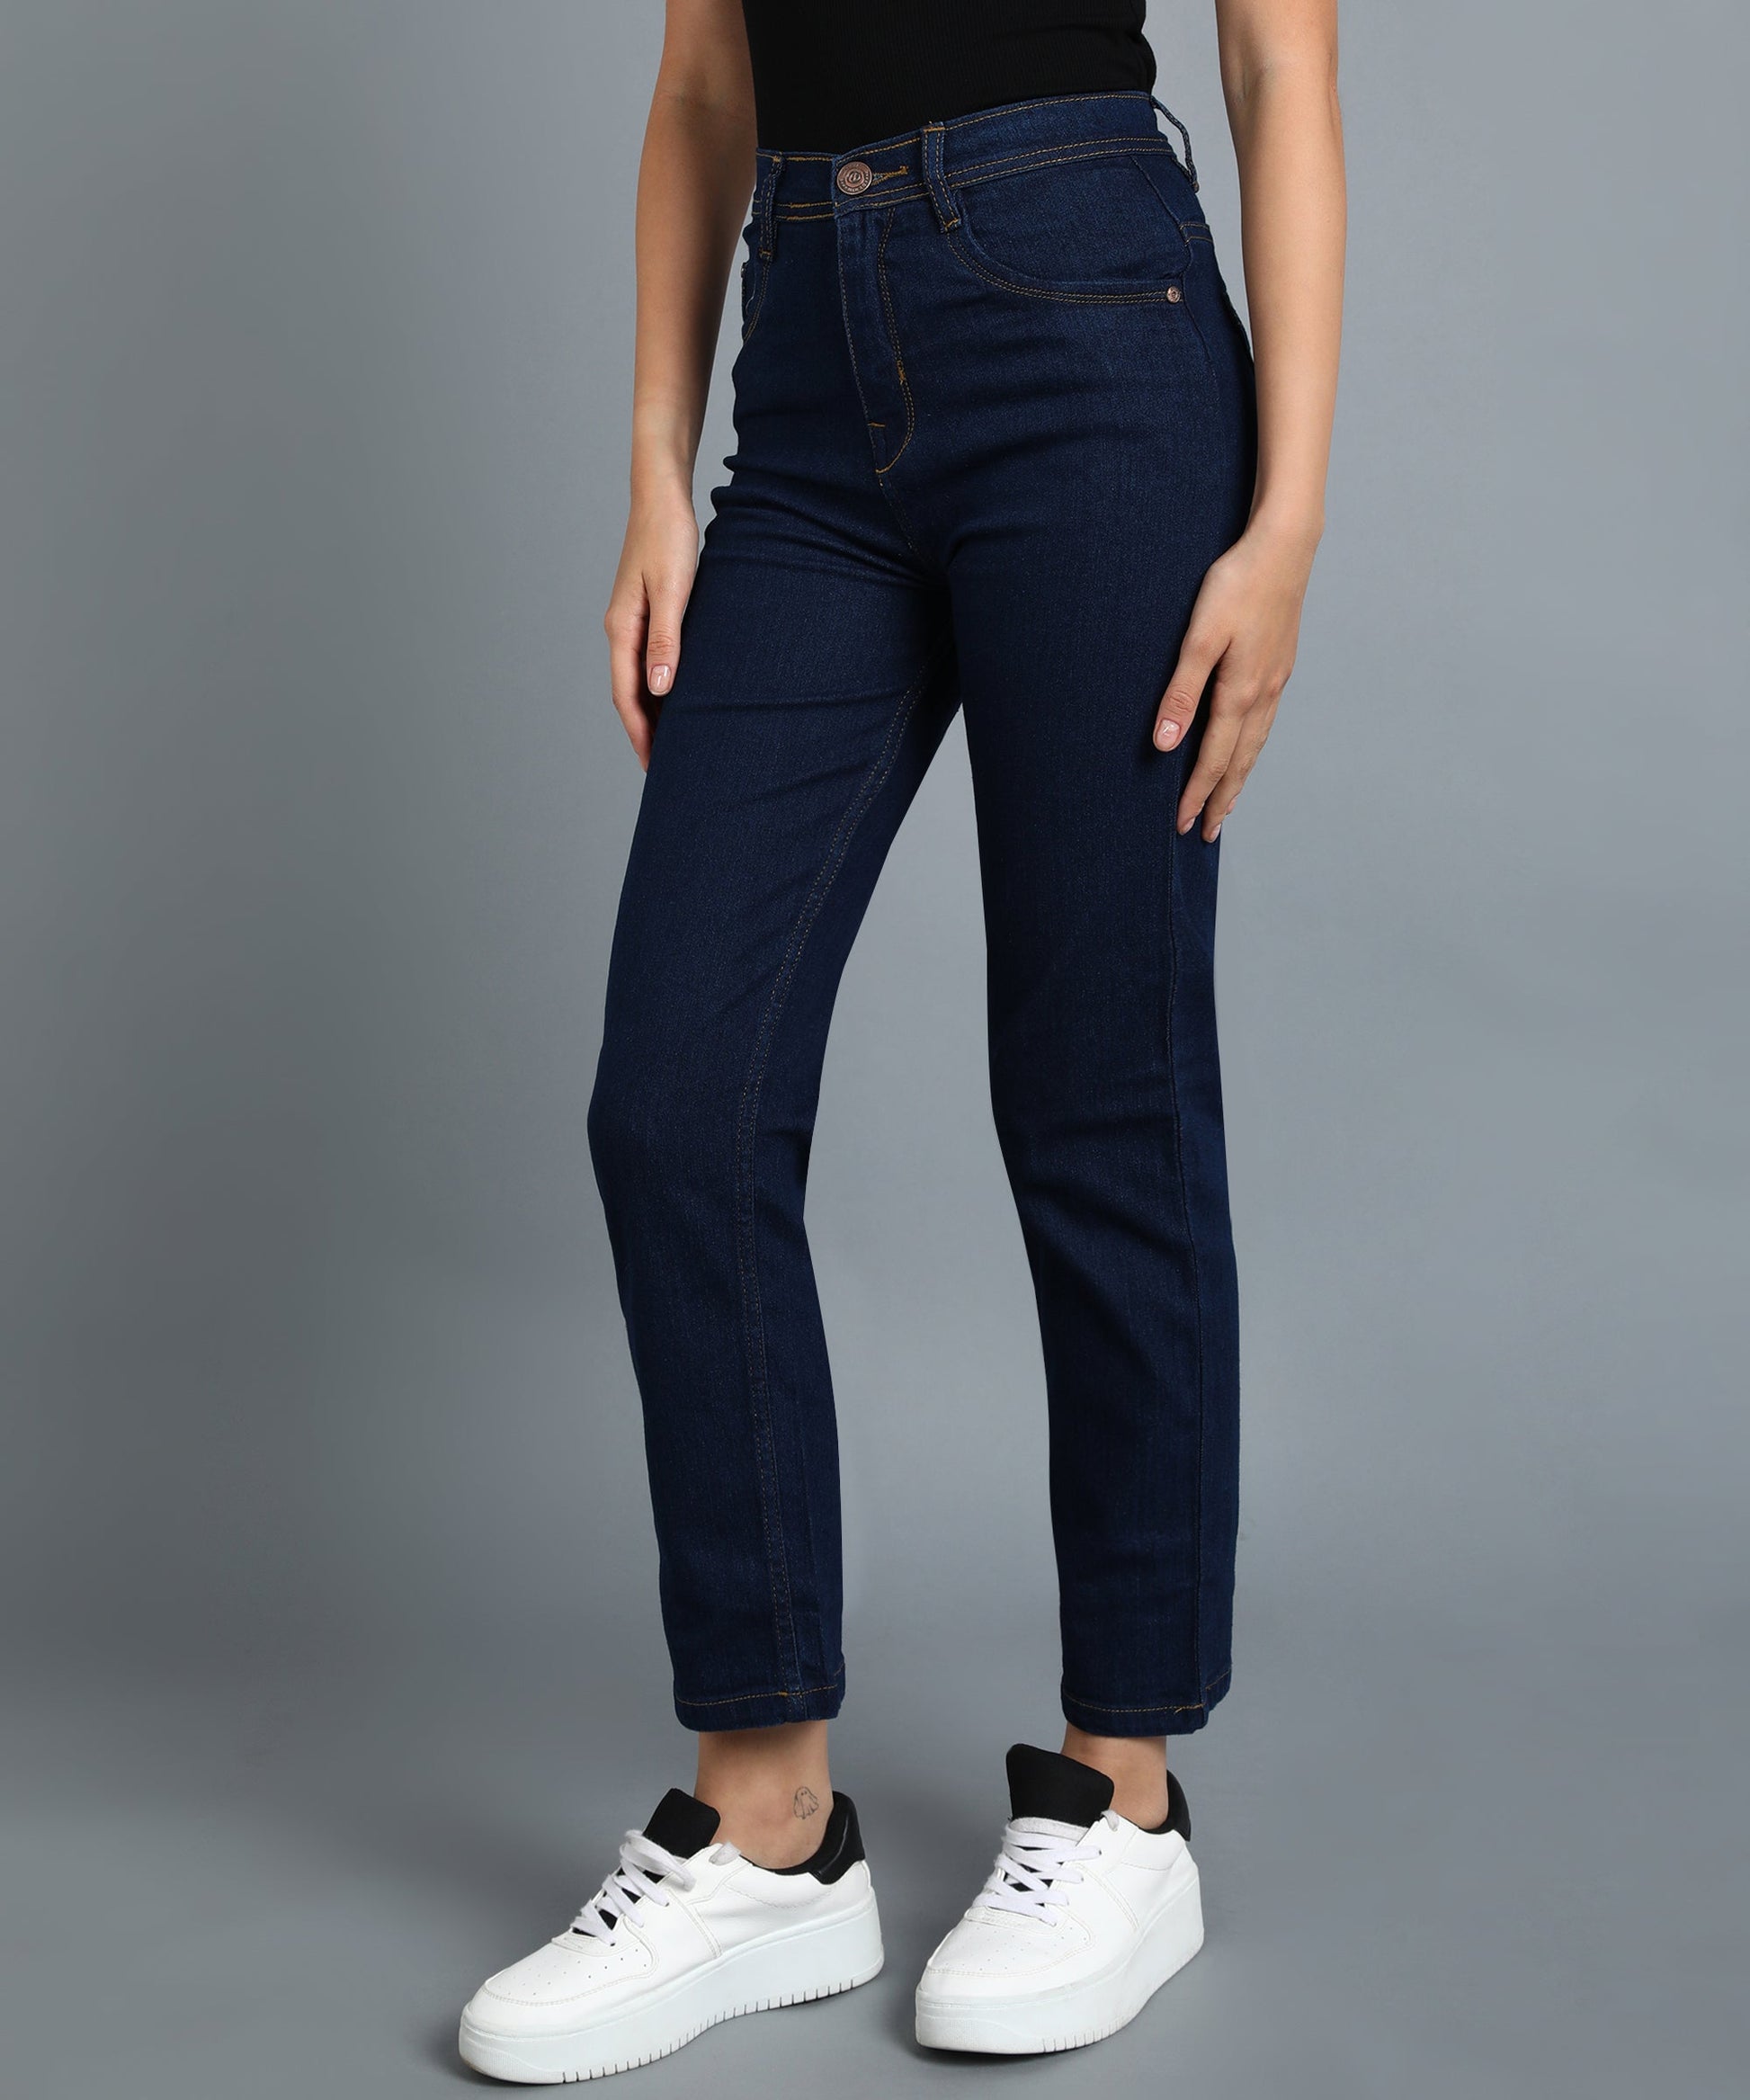 Basic Blue straight fit 5- pocket high rise jeans, clean look, zip fly with button closure, waistband with belt loops